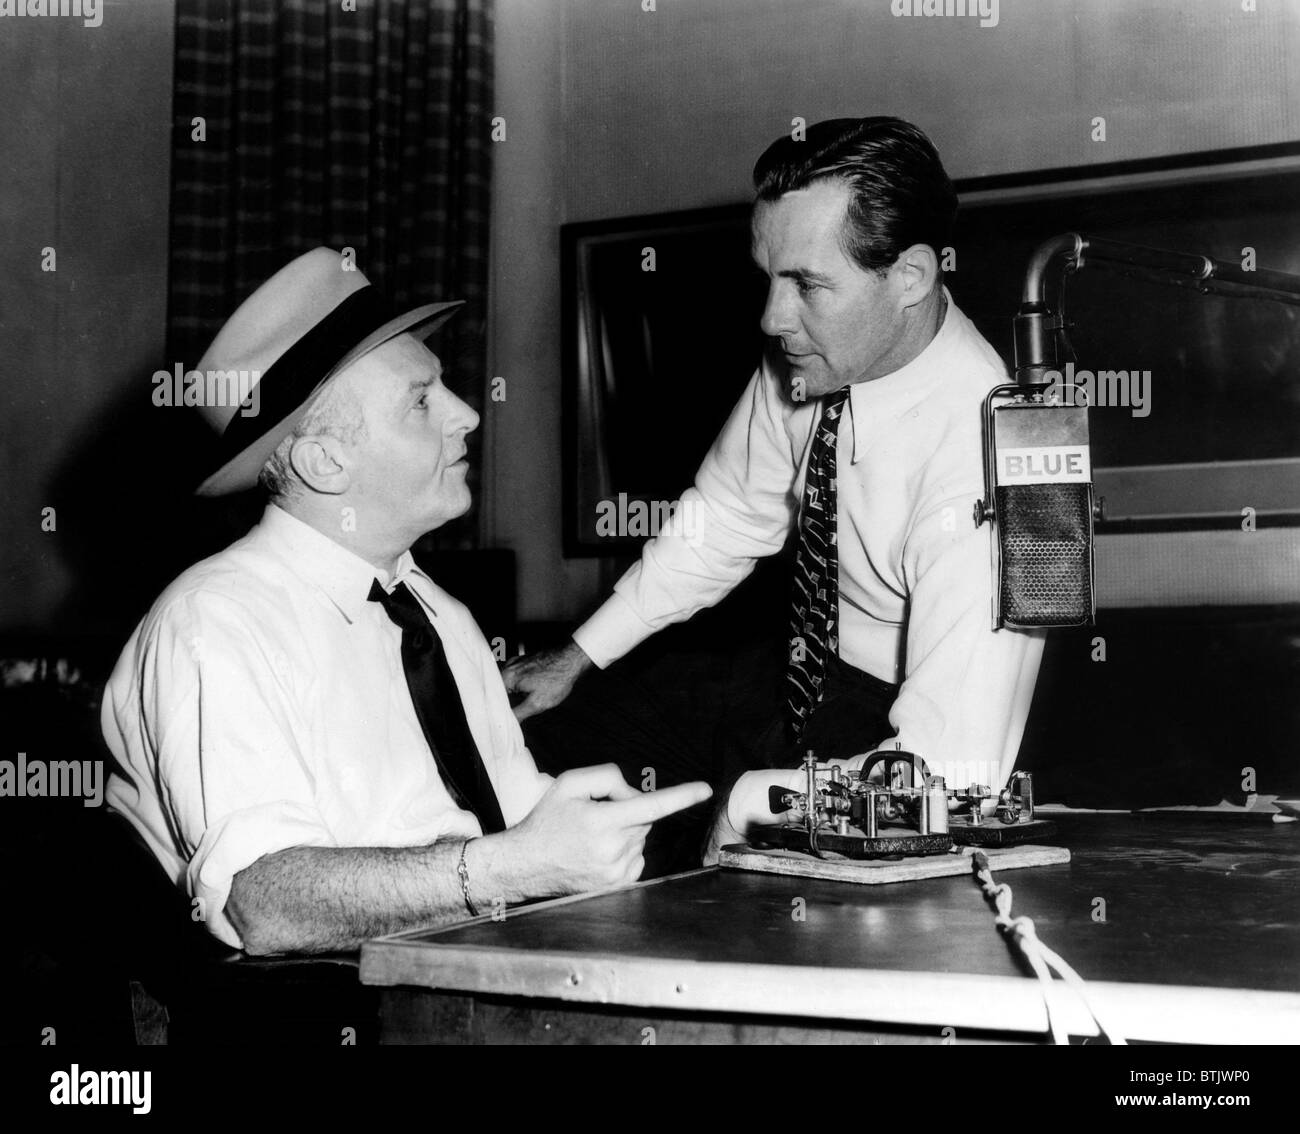 American radio commentators Walter Winchell (left), and Jimmy Fidler (right), just before going on the air for NBC's BLUE networ Stock Photo